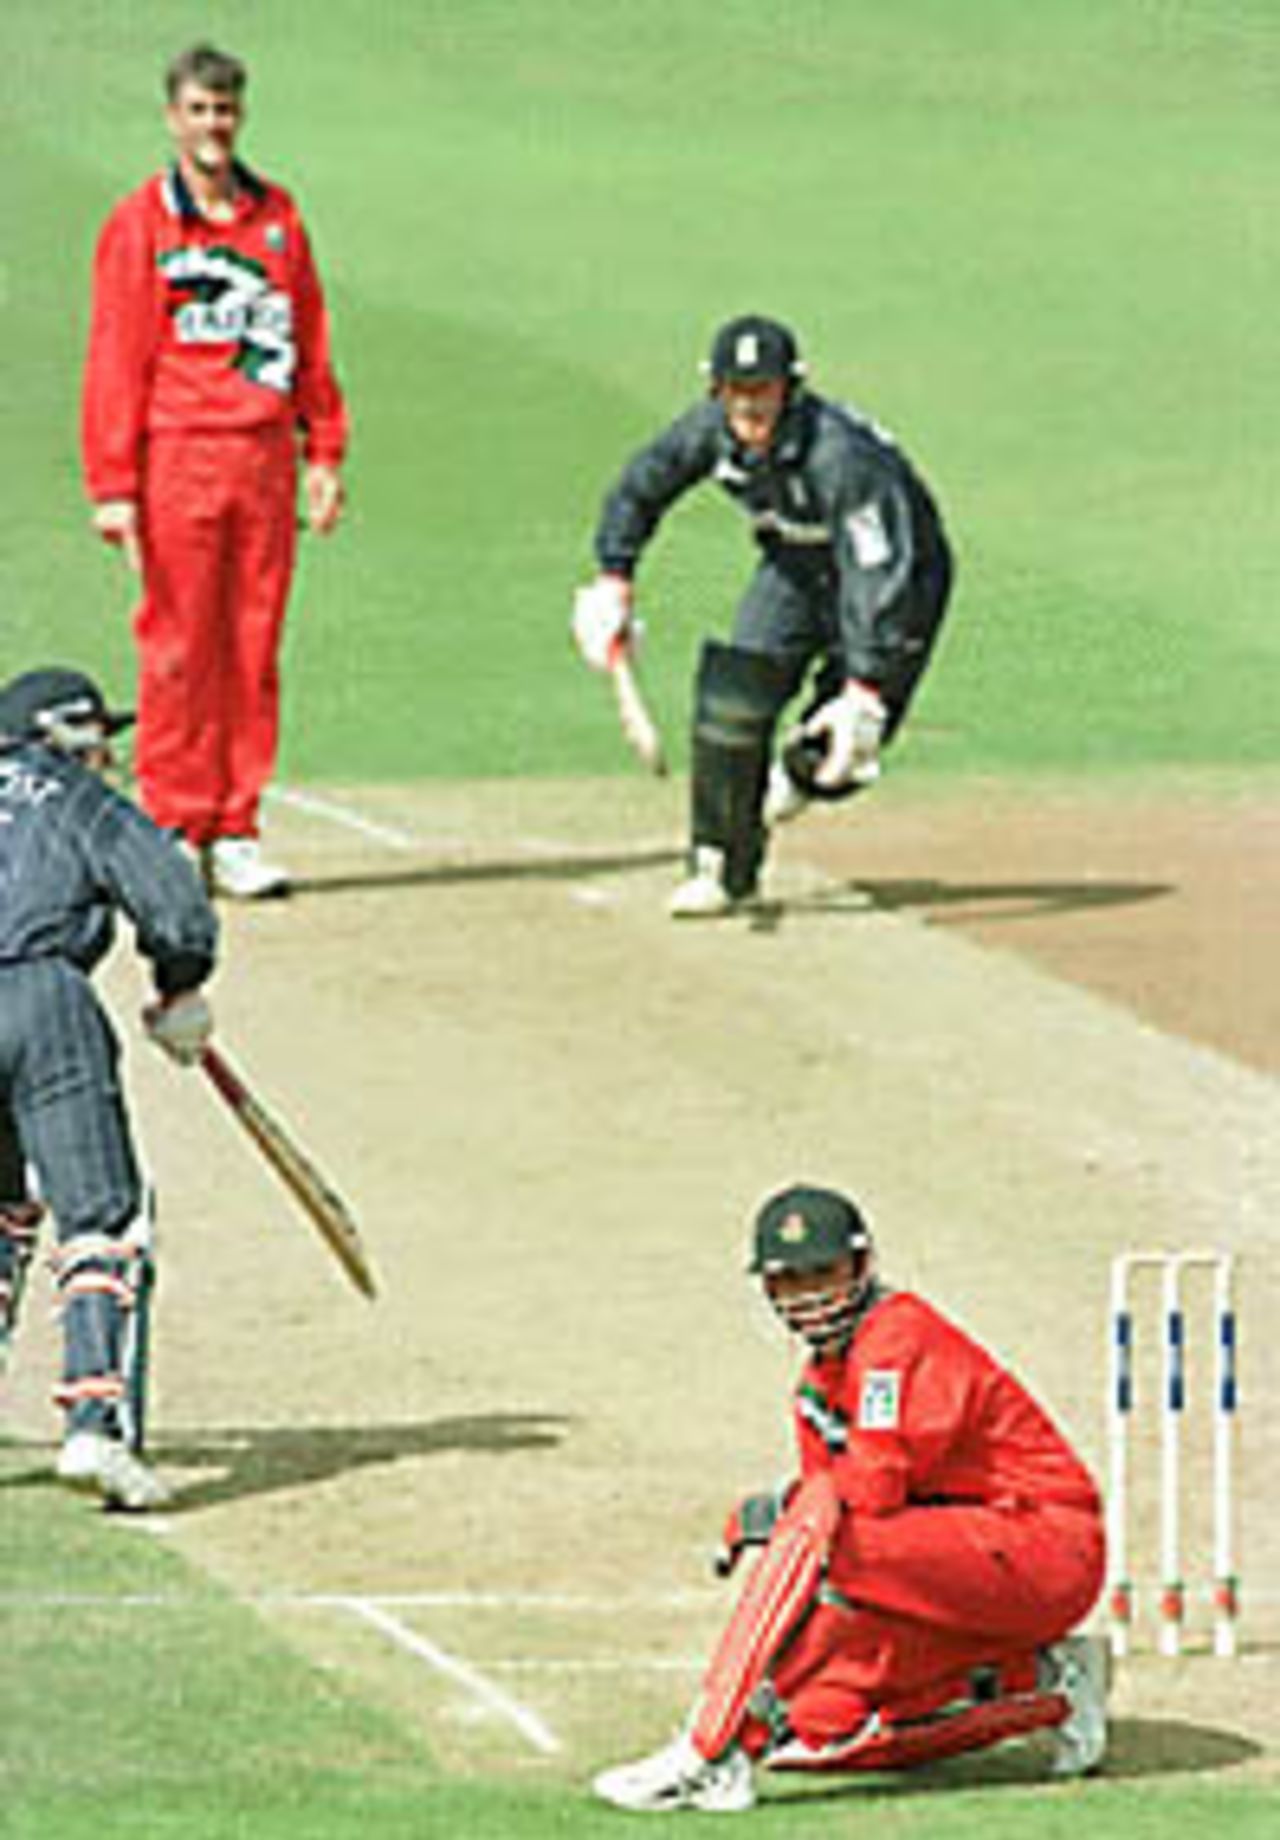 Warren Hegg looking at the ball which he failed to collect, Warwickshire v Lancashire, National League 1st Division, 13 June 1999